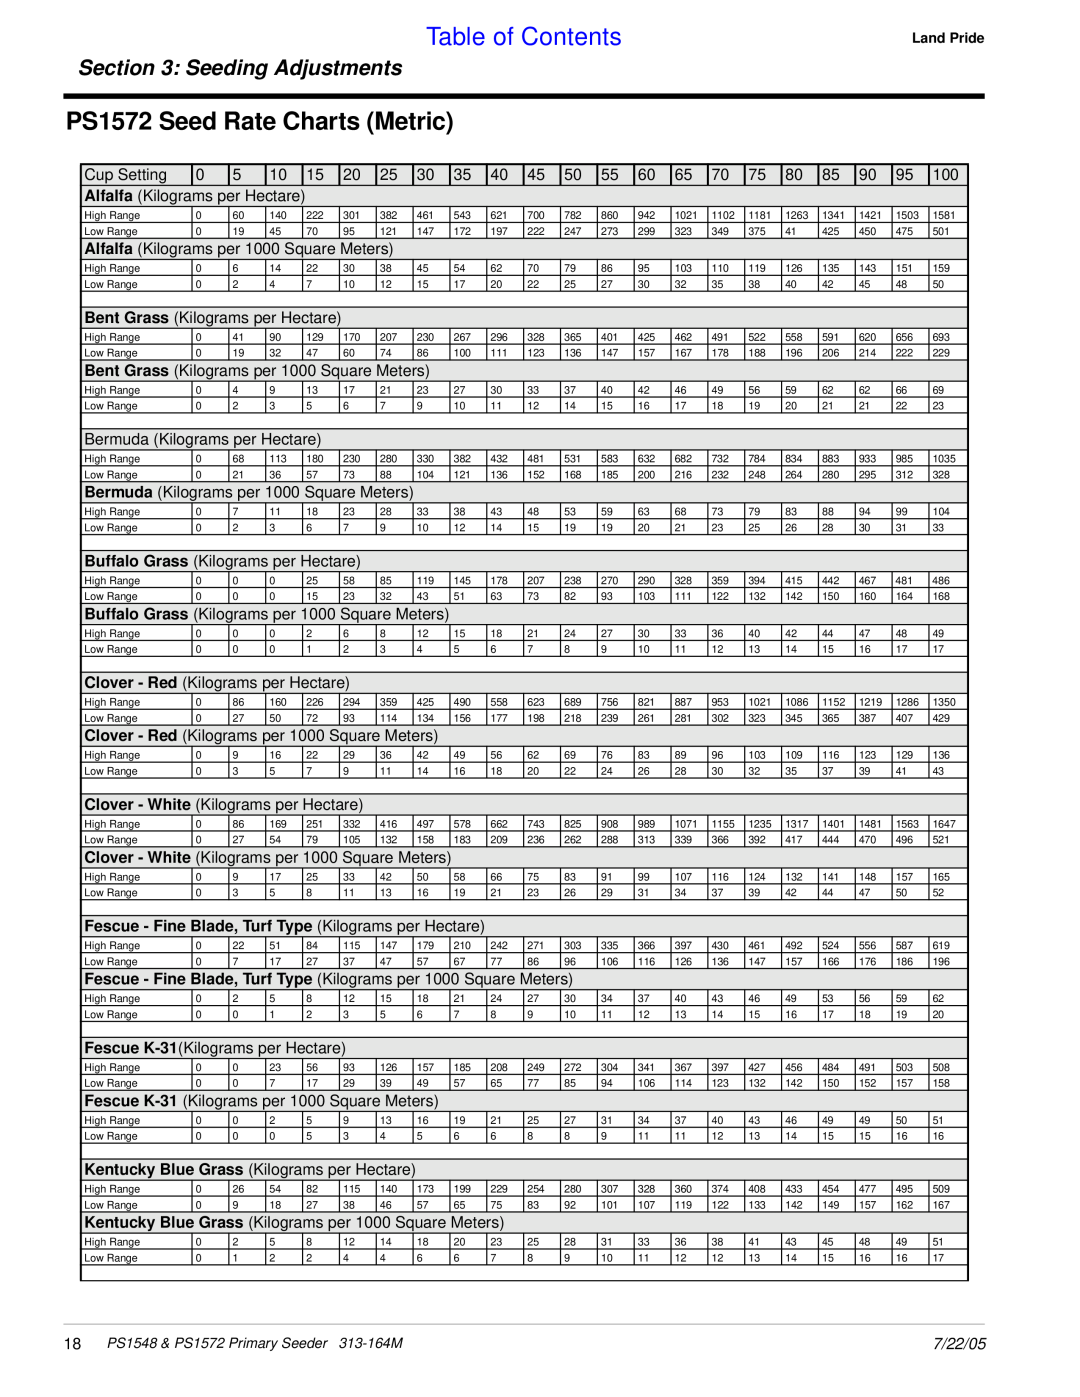 Land Pride PS1548 manual PS1572 Seed Rate Charts Metric, Table of Contents, Seeding Adjustments, 7/22/05 